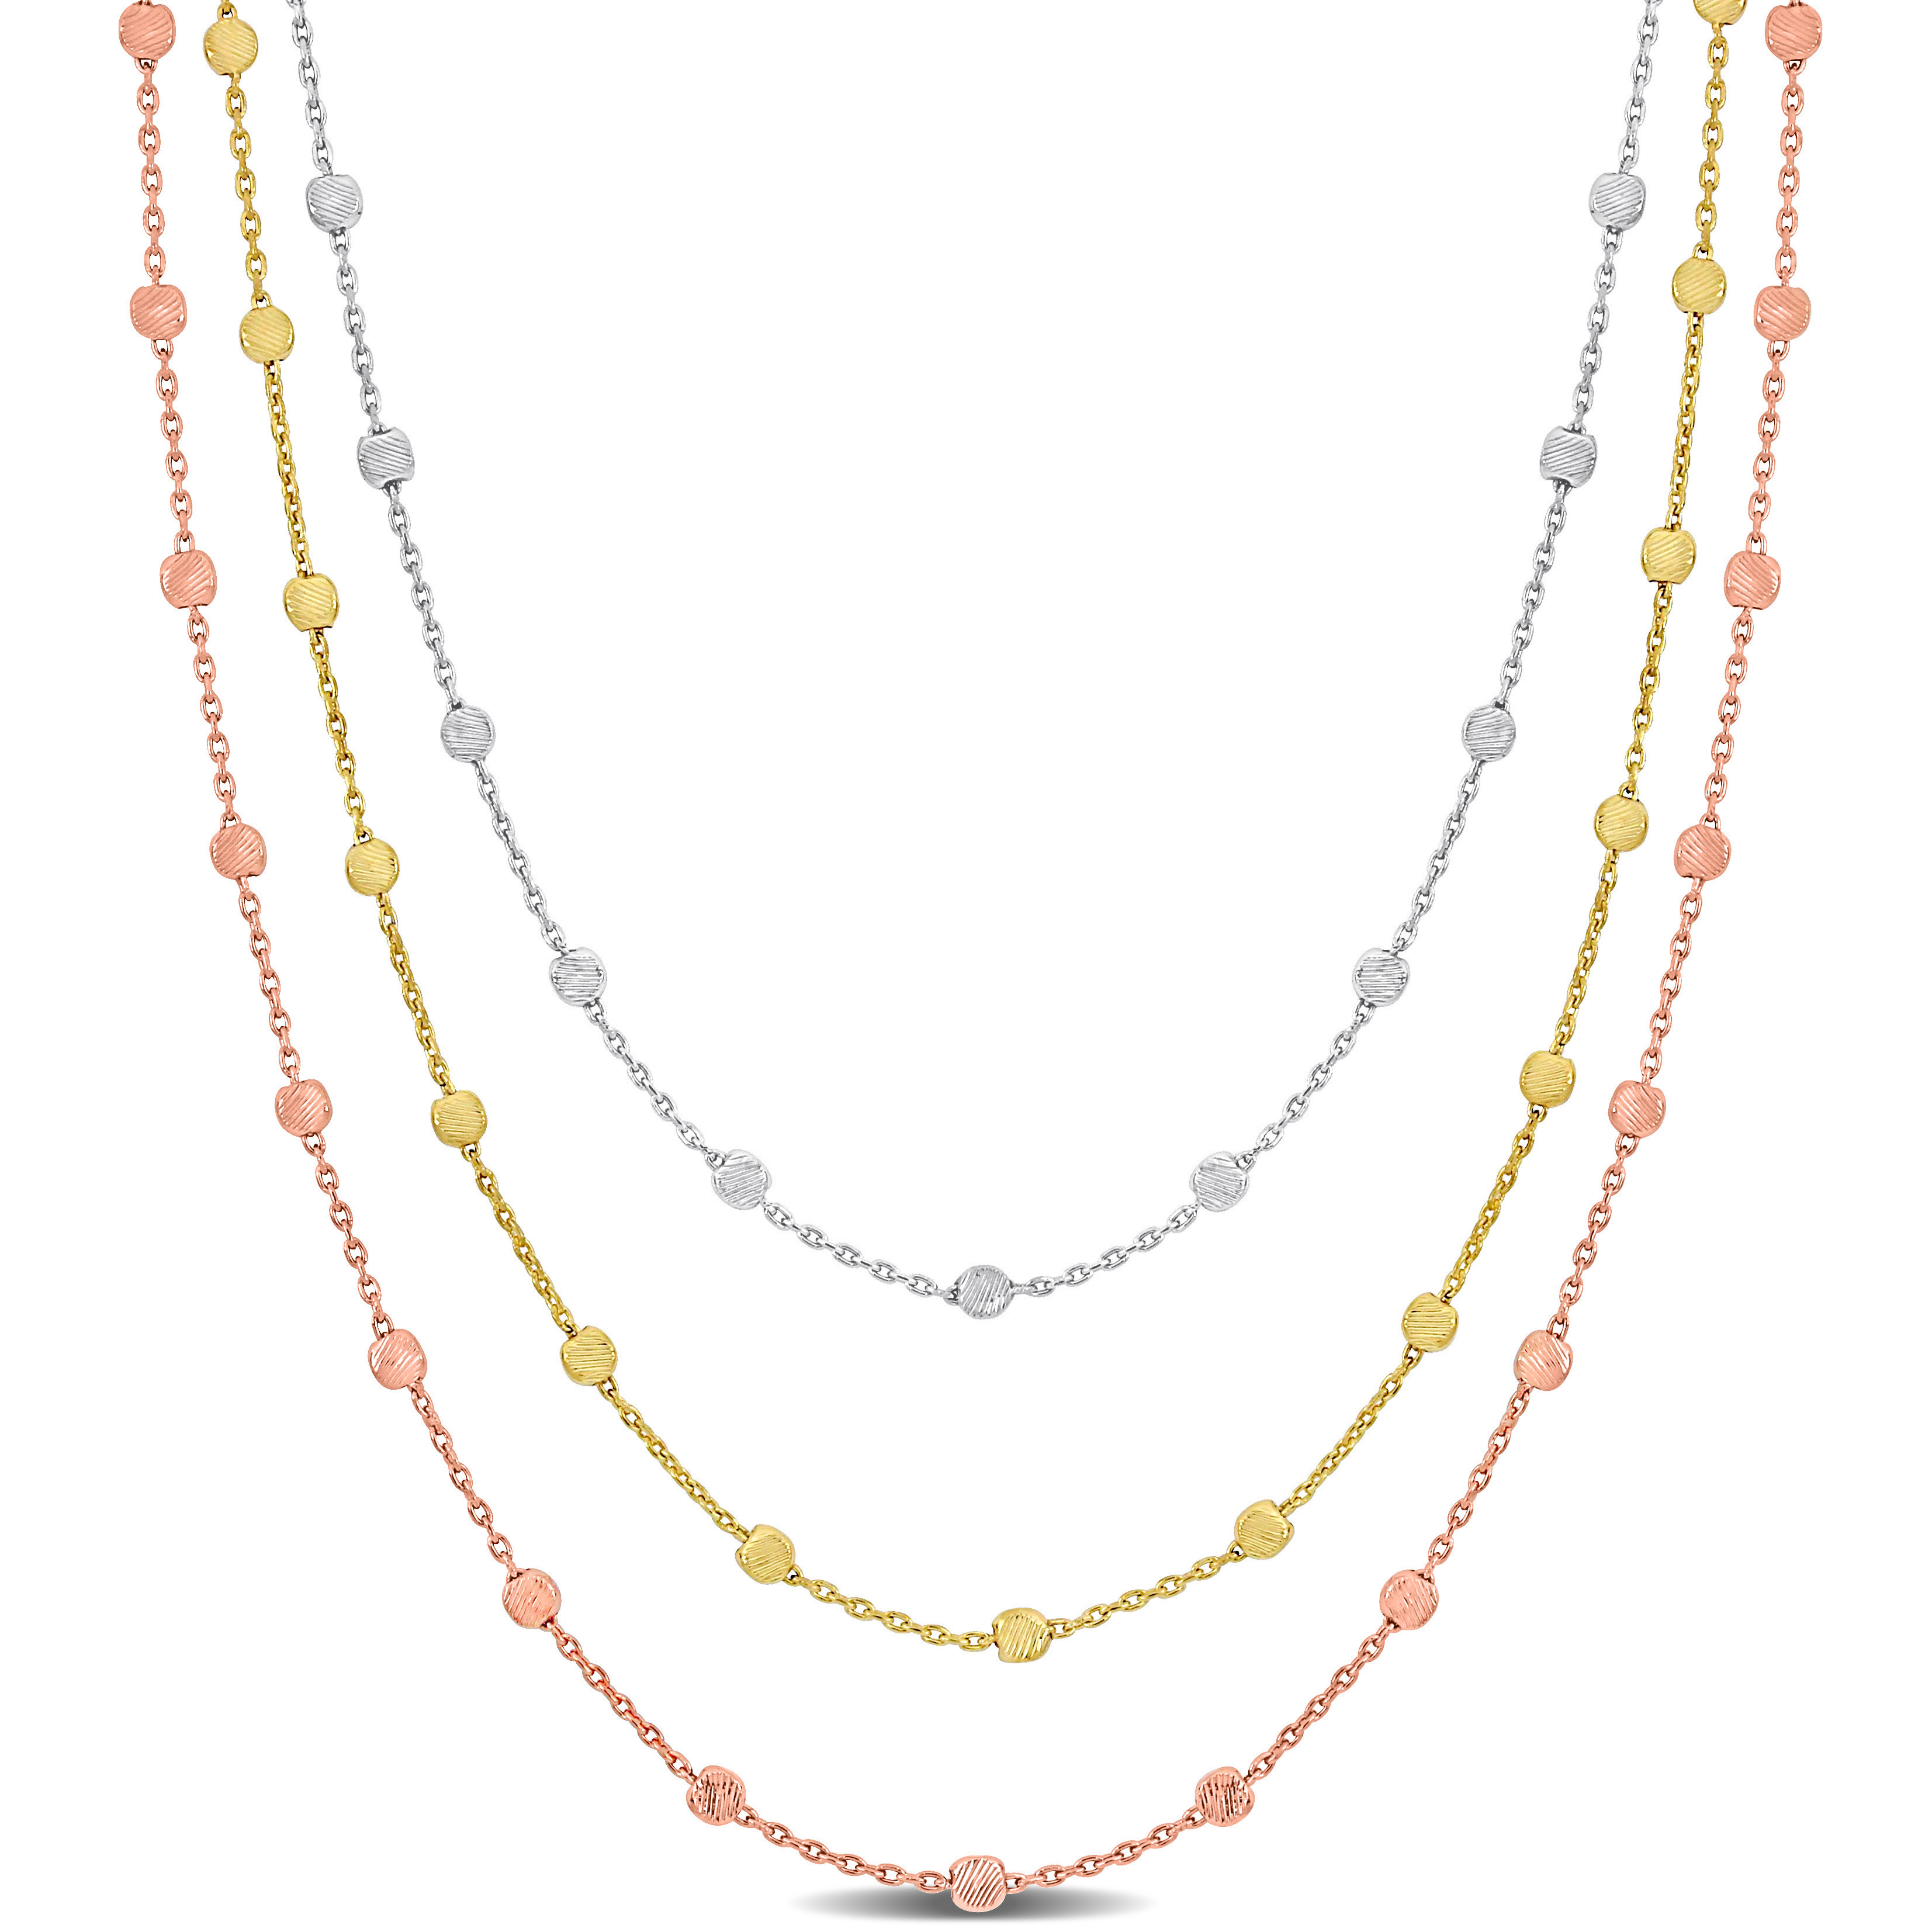 3-Strand Ball Station Necklace in 3-Tone Rose Yellow and White Sterling Silver - 16+2 in.